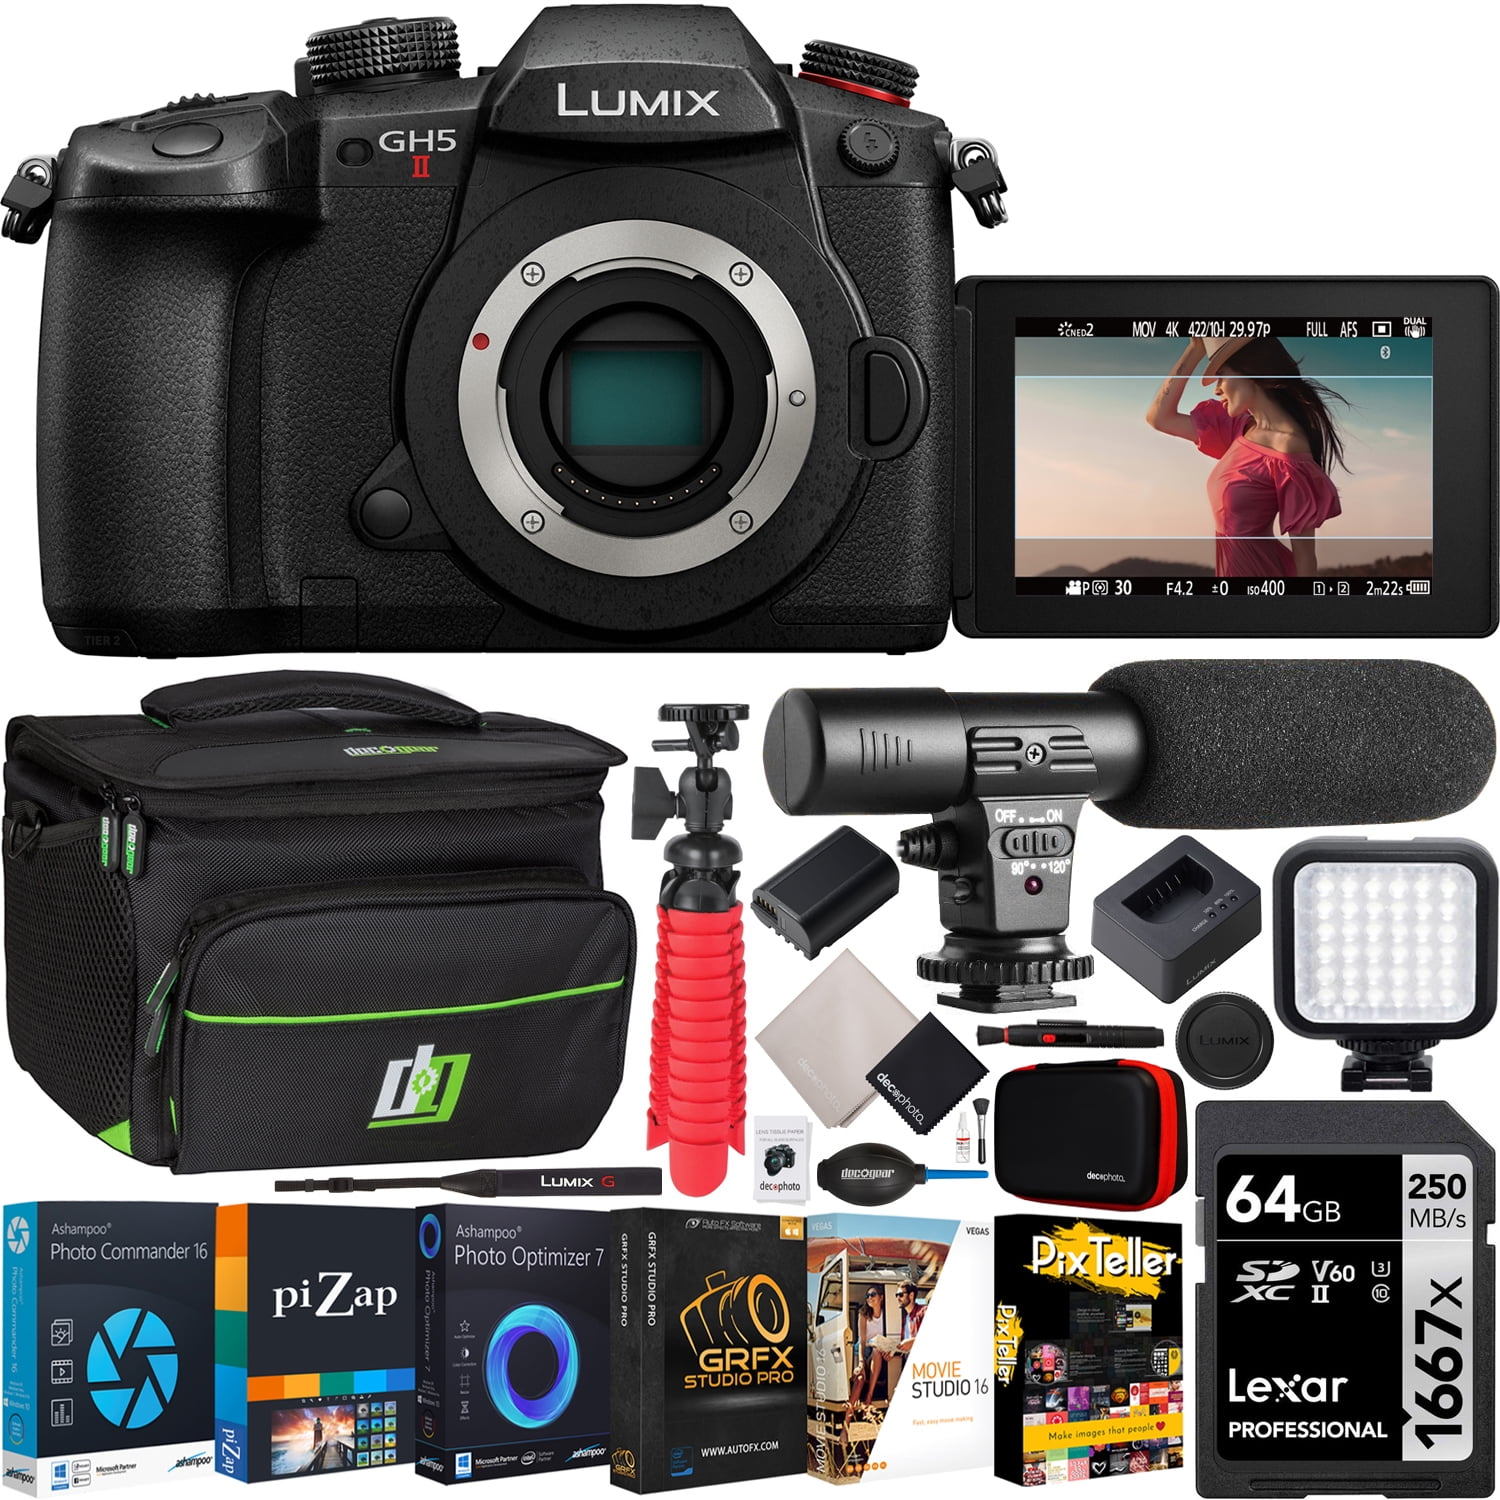 Panasonic LUMIX GH5M2 Mirrorless Camera Body with Live-Streaming & 4K Video DC-GH5M2BODY Bundle with Deco Microphone + Light + Case Photo Video & Photography Accessories Kit - Walmart.com